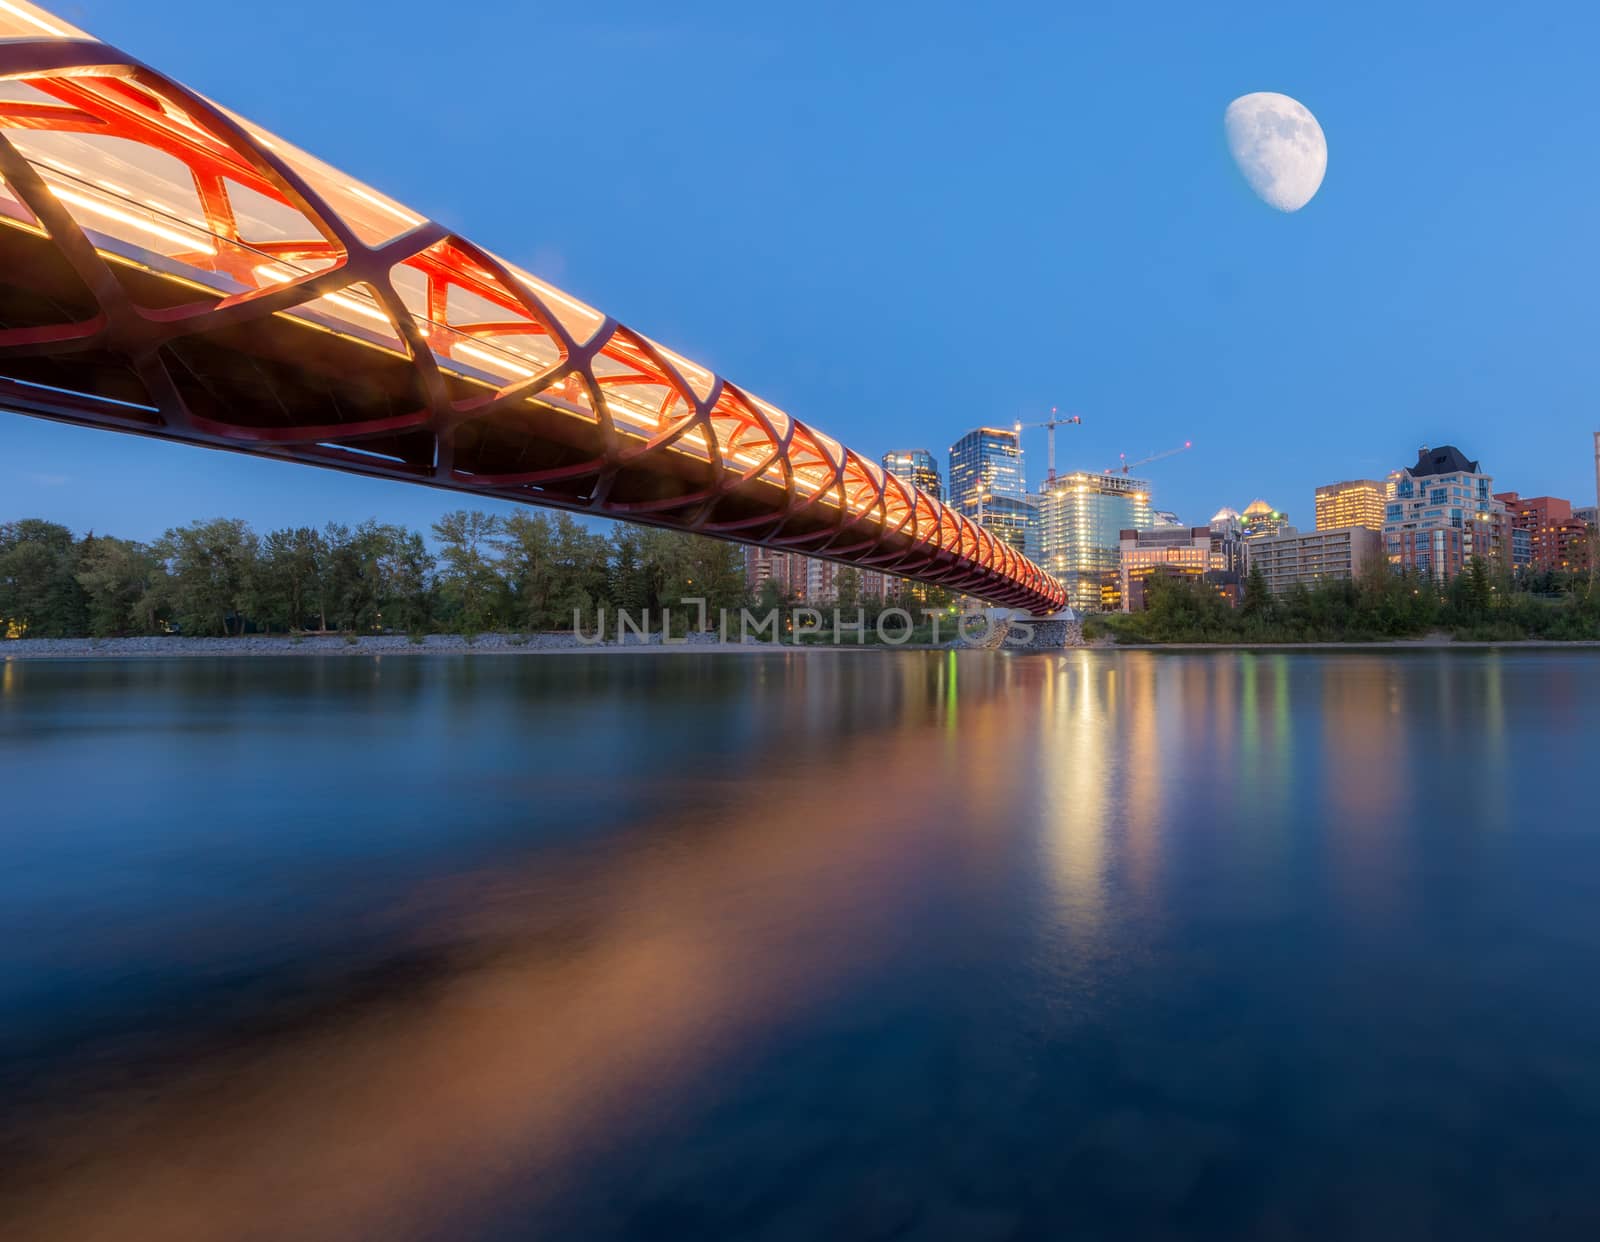 Bridge over water in front of buildings with moon by TSLPhoto